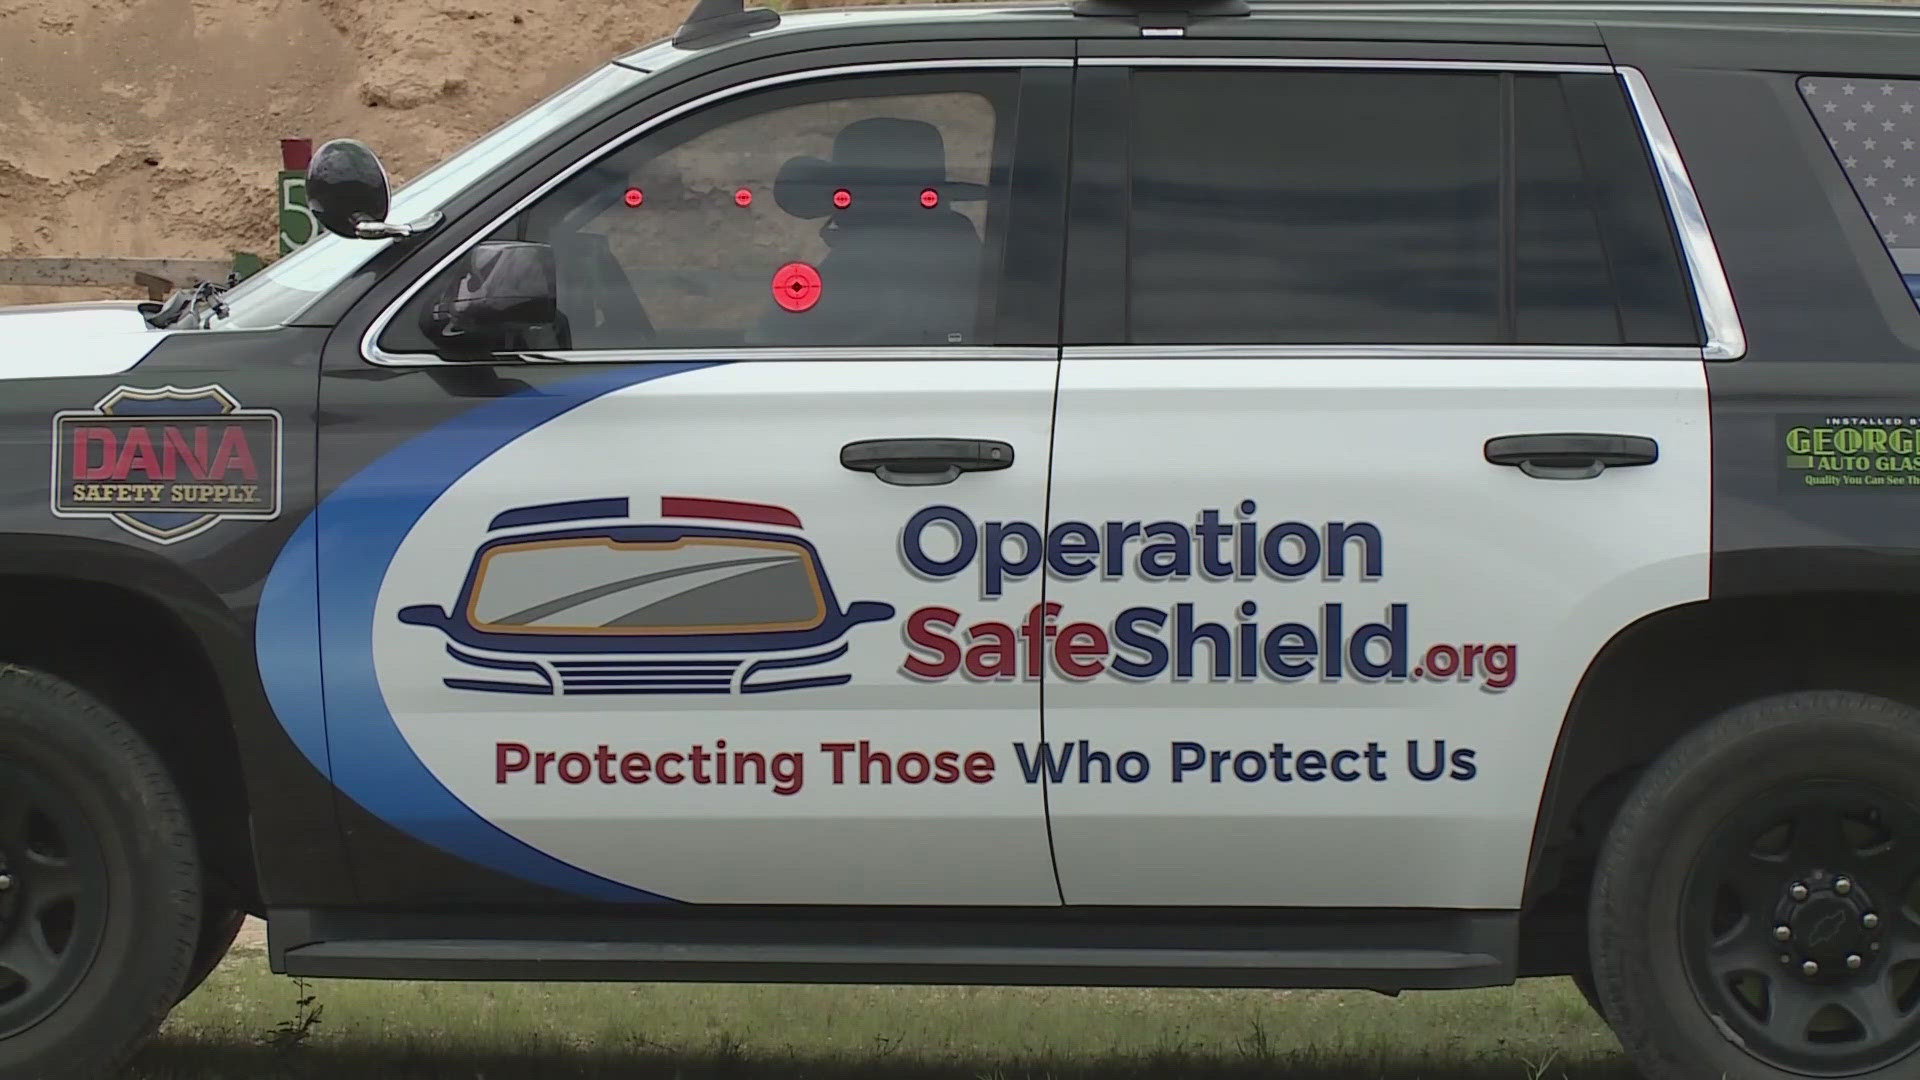 Operation Safe Shield raises funds to get updated technology like the one shown in the demonstrations to police agencies around the country.